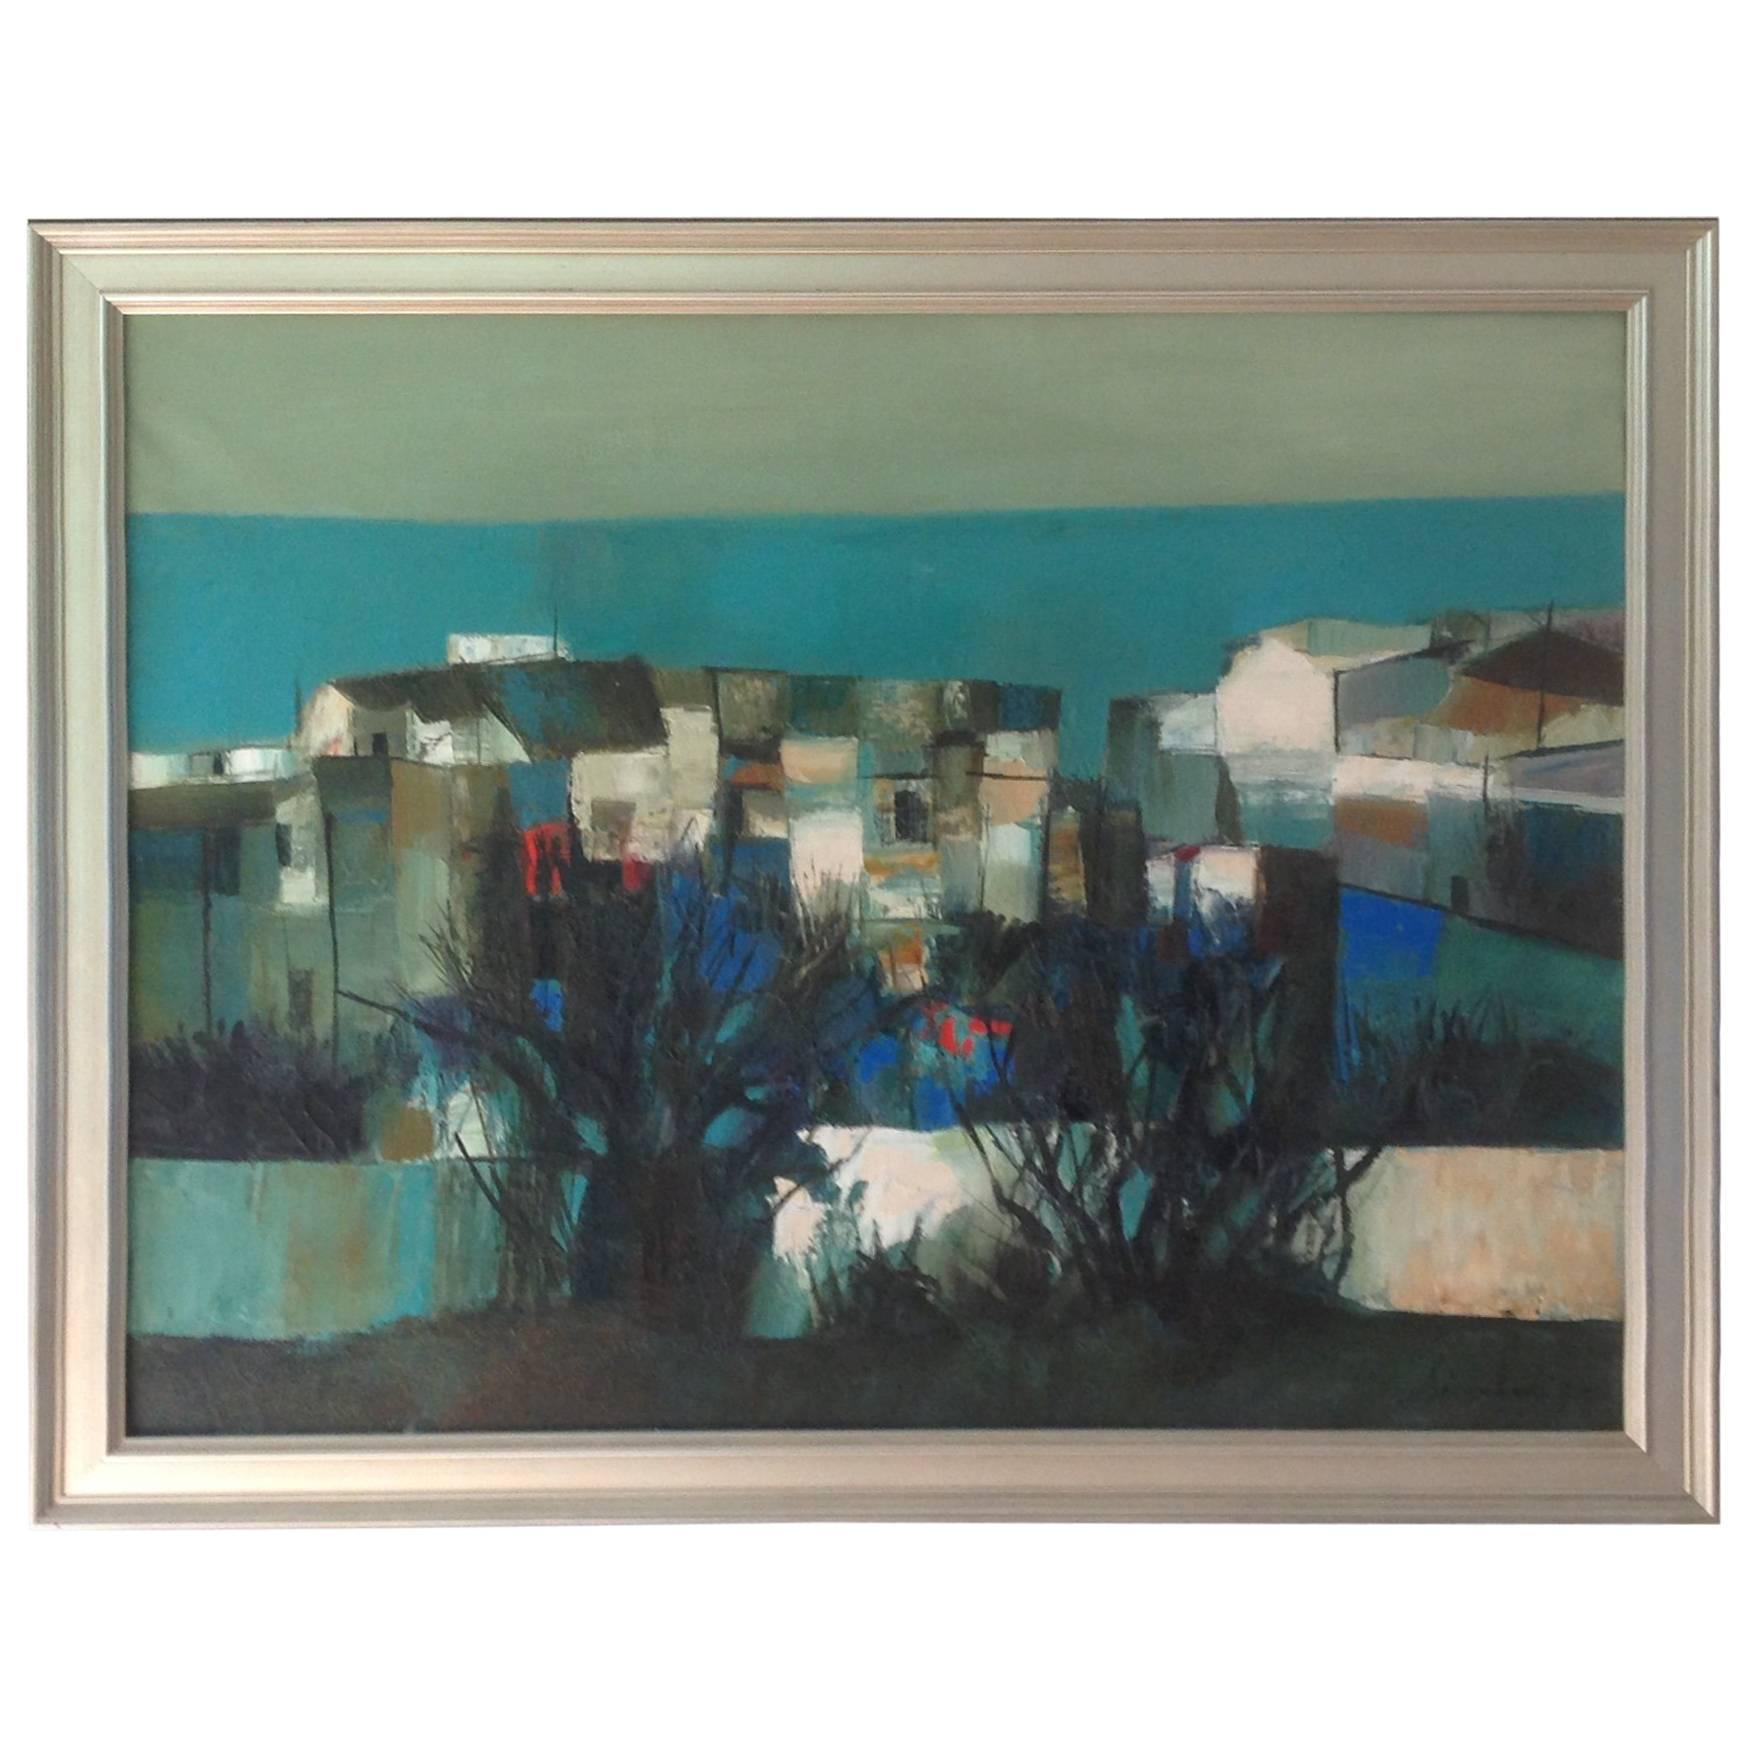 Amazing Early Abstract Lanscape Painting by Nicola Simbari Titled Contrada Caten